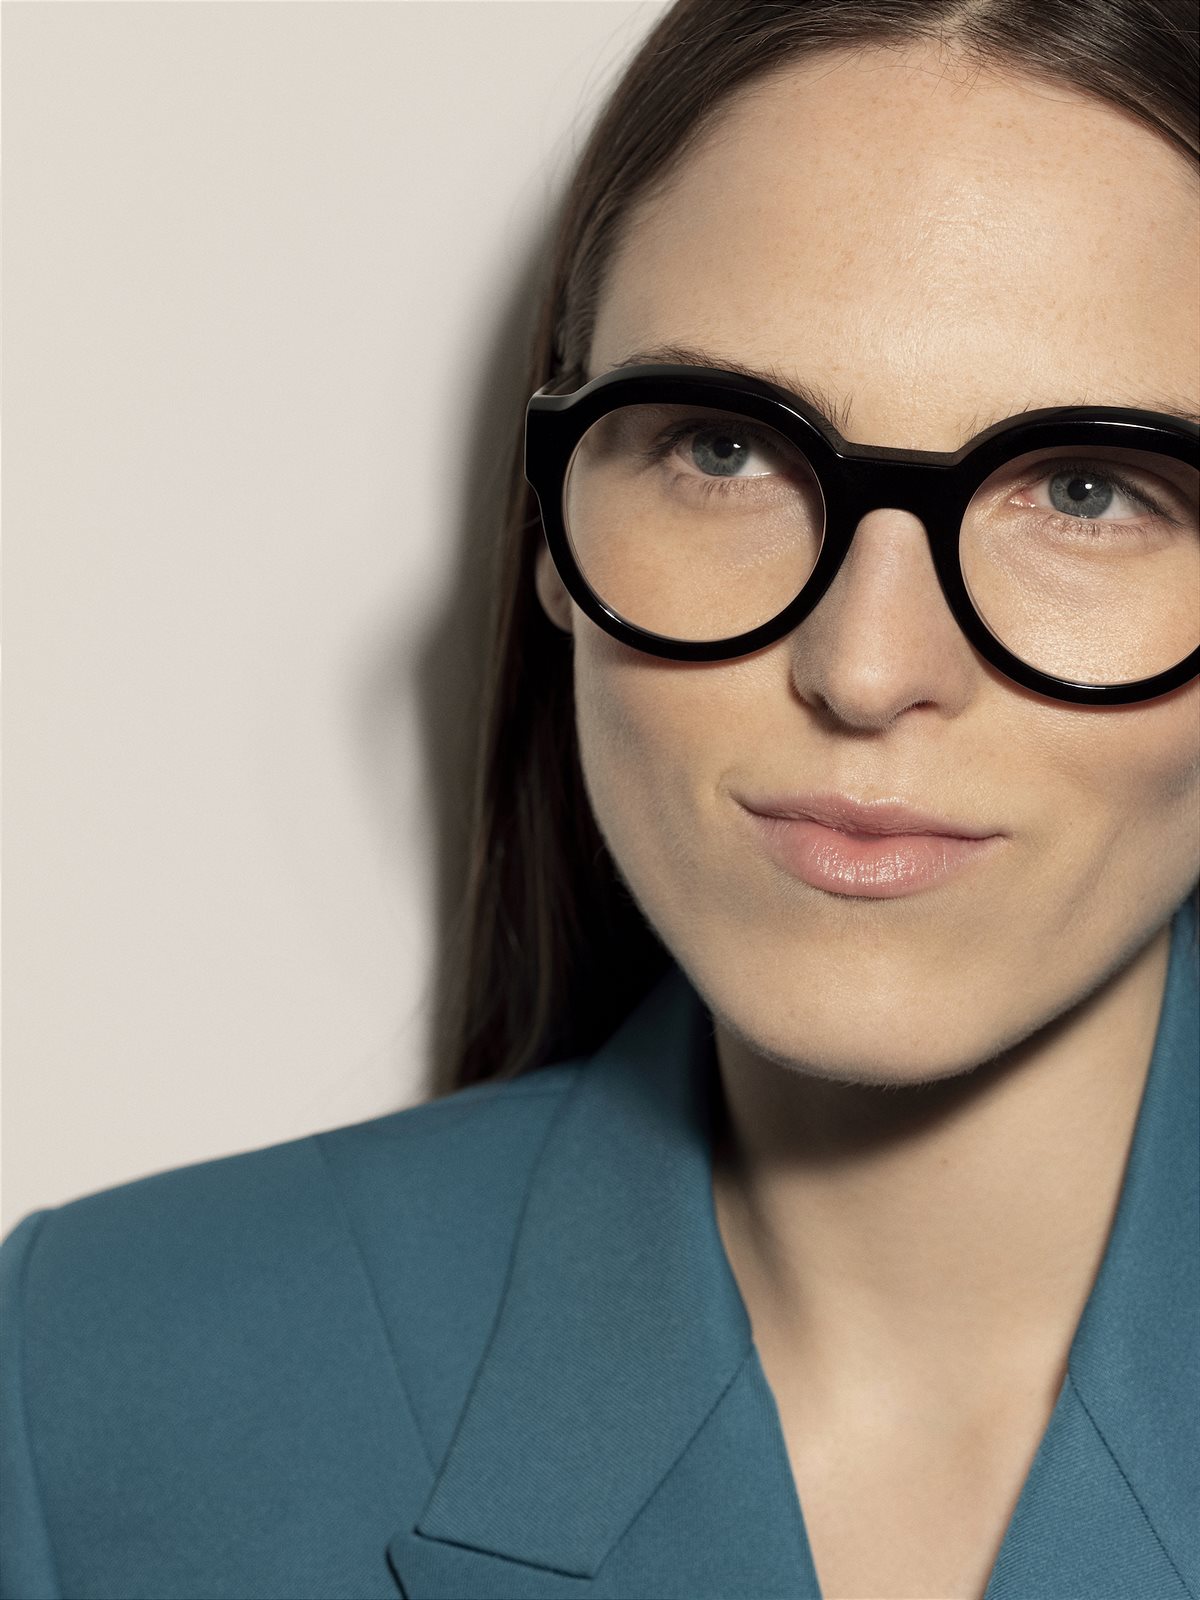 ANDY WOLF Eyewear_Rediscover 2021 Collection_4596_1_© Bastian Thiery